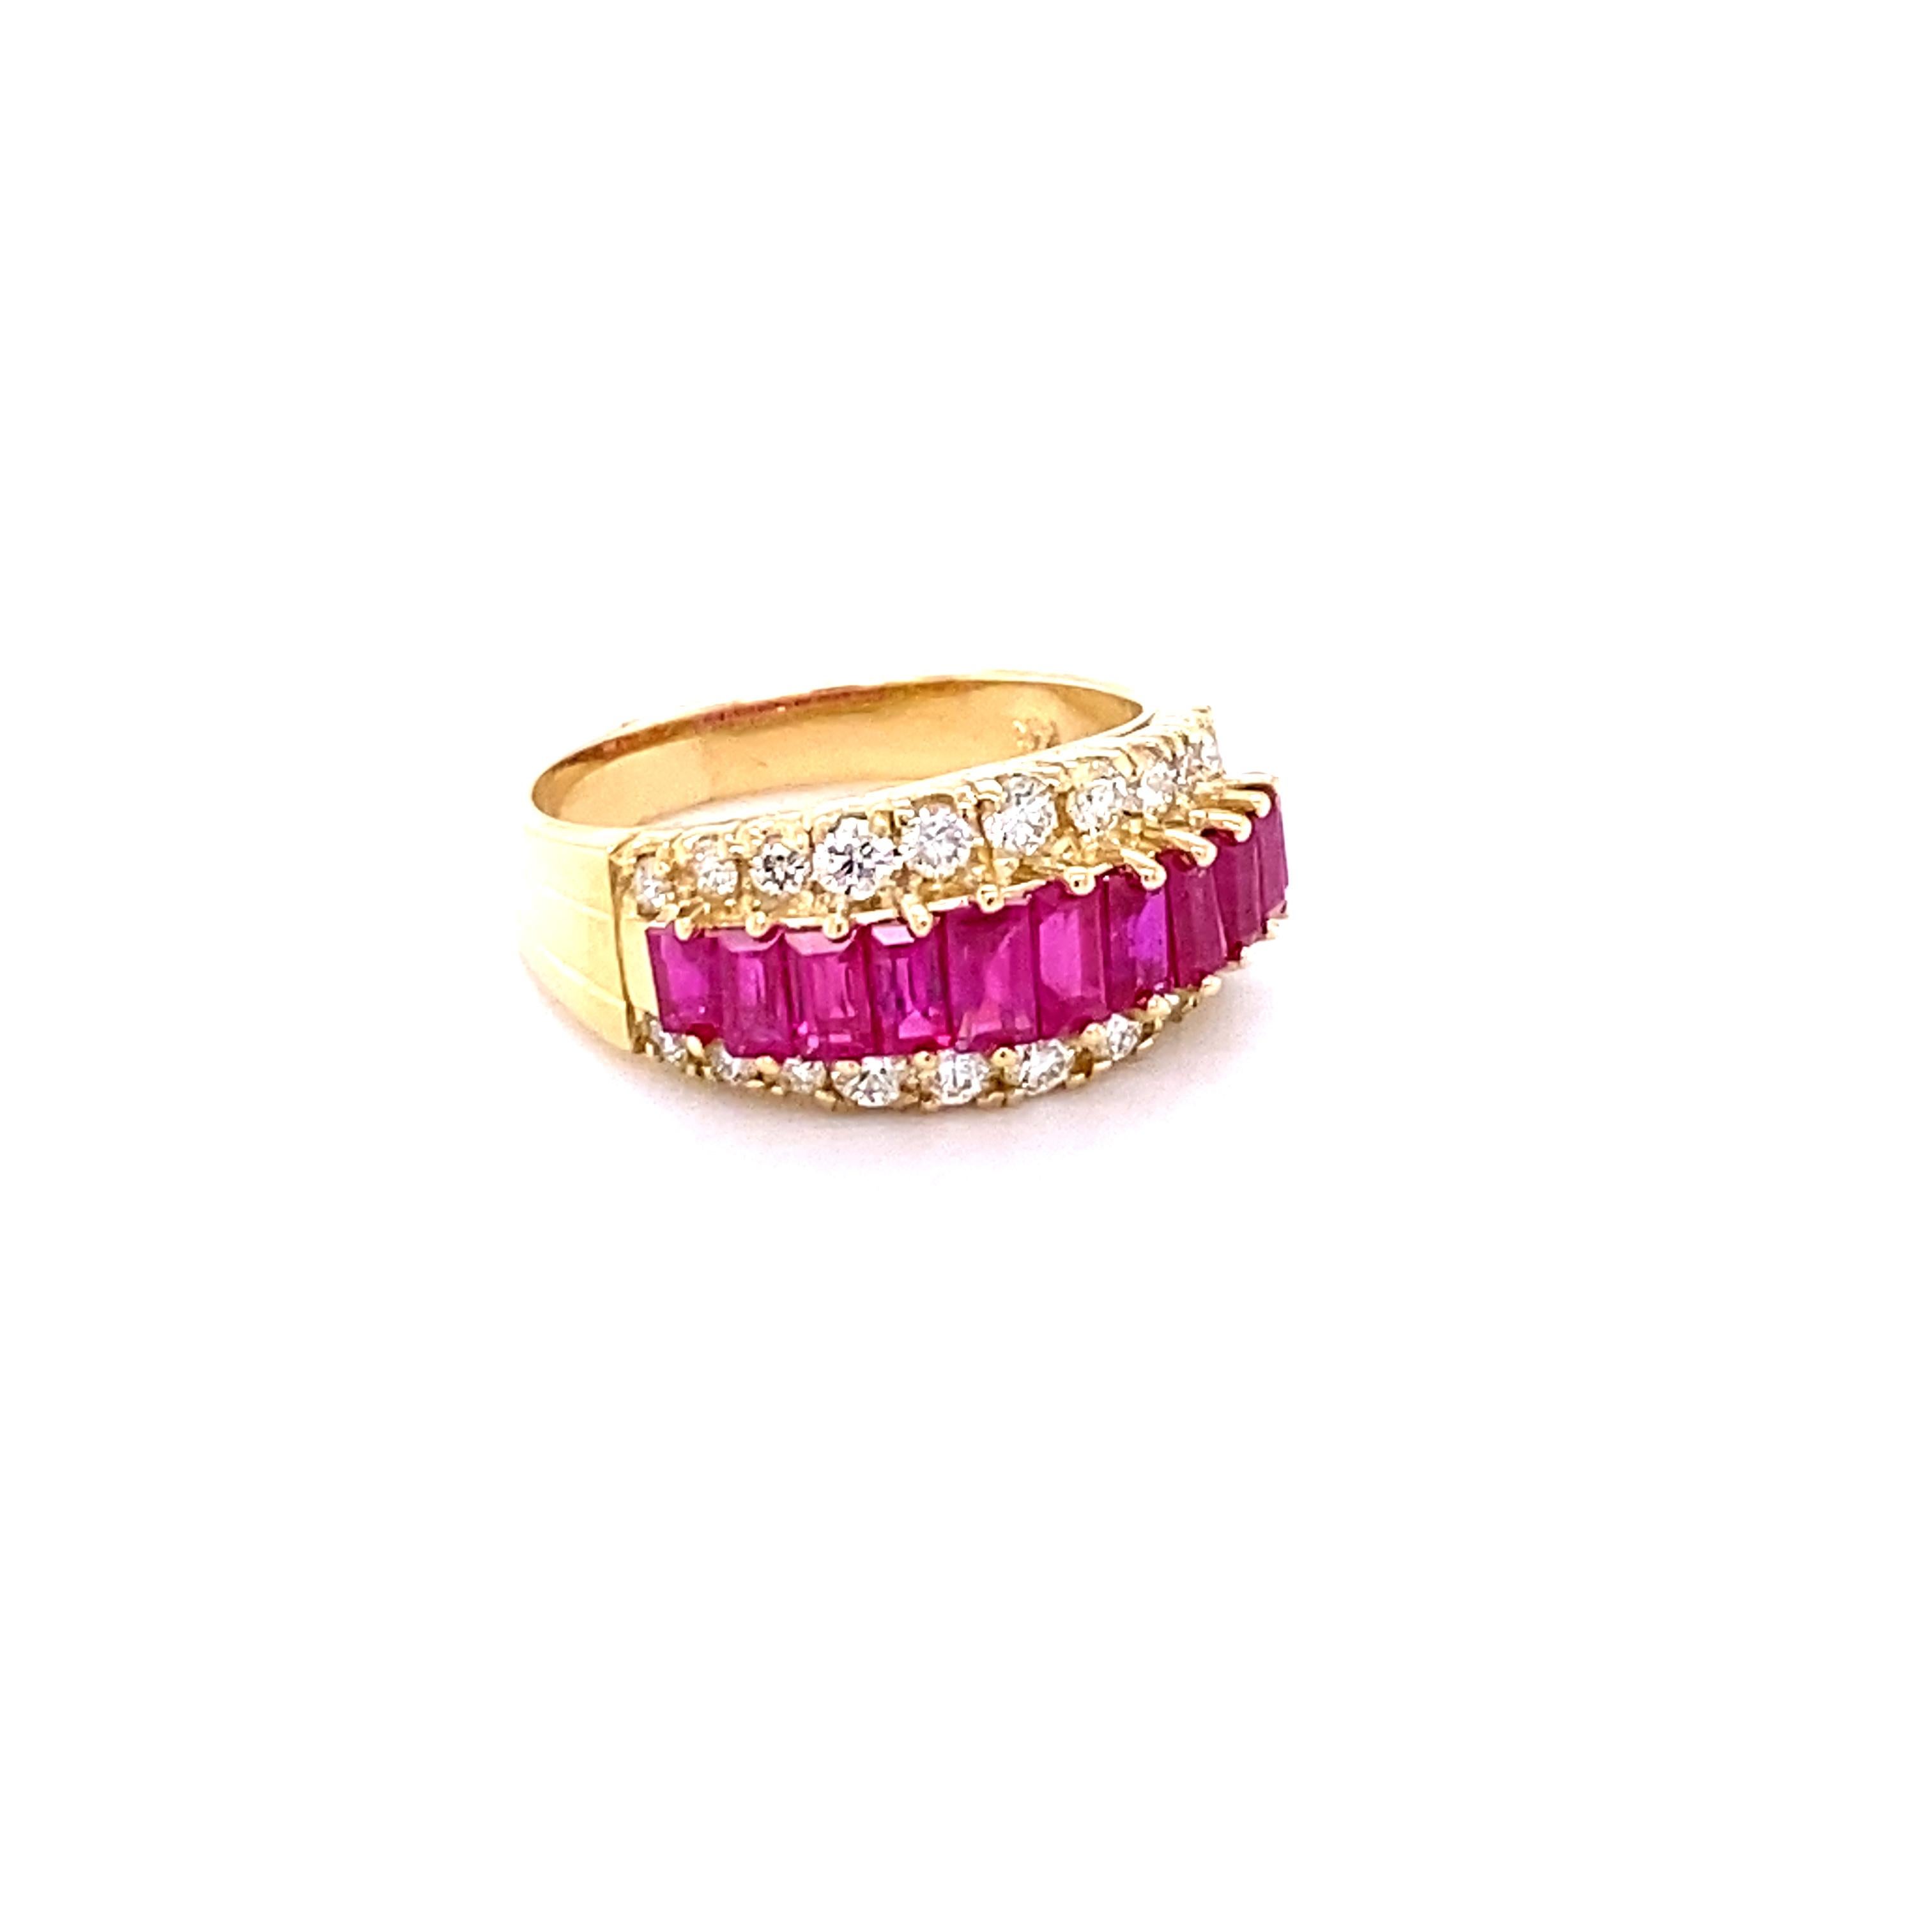 This ring has 11 Straight Baguette Cut Rubies that weigh 1.85 Carats and 22 Round Cut Diamonds that weigh 0.50 Carats with a clarity and color of VS-H. The total carat weight of the ring is 2.35 Carats.

The ring is casted in 14K Yellow Gold and